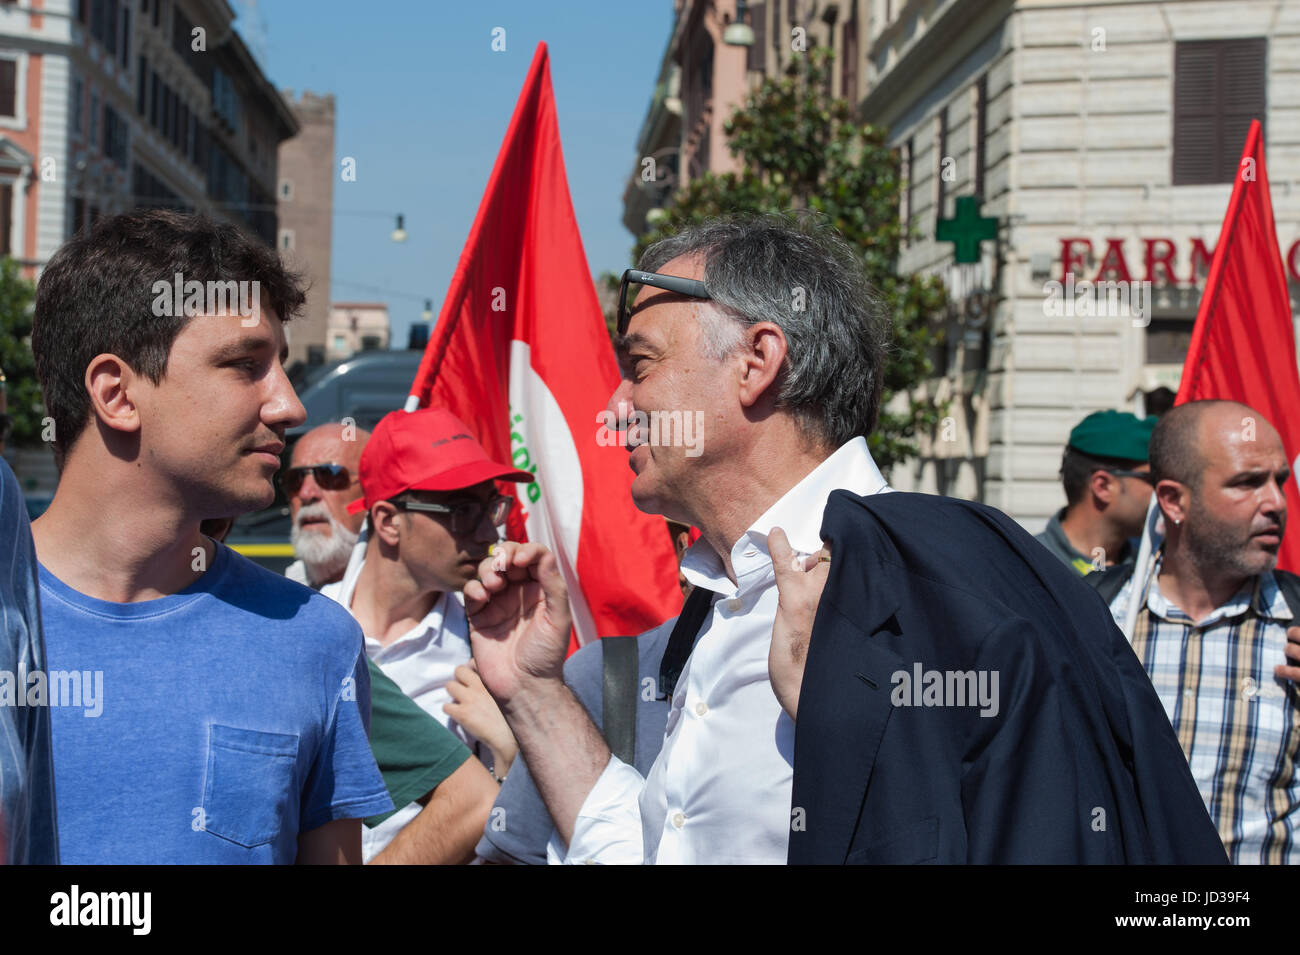 The workers of the main Italian trade union have manifested themselves in Rome to demand more Respect, more Work, more Democracy. Political and trade union representatives also attended the event, including former secretary of CGIL Guglielmo Epifani, national secretary of Italian Left Nicola Fratoianni and the National Metalworker (FIOM) secretary Maurizio Landini. The event ended with the intervention of the national secretary Susanna Camusso The workers of the main Italian trade union have manifested themselves in Rome to demand more Respect, more Work, more Democracy. Political and trade un Stock Photo